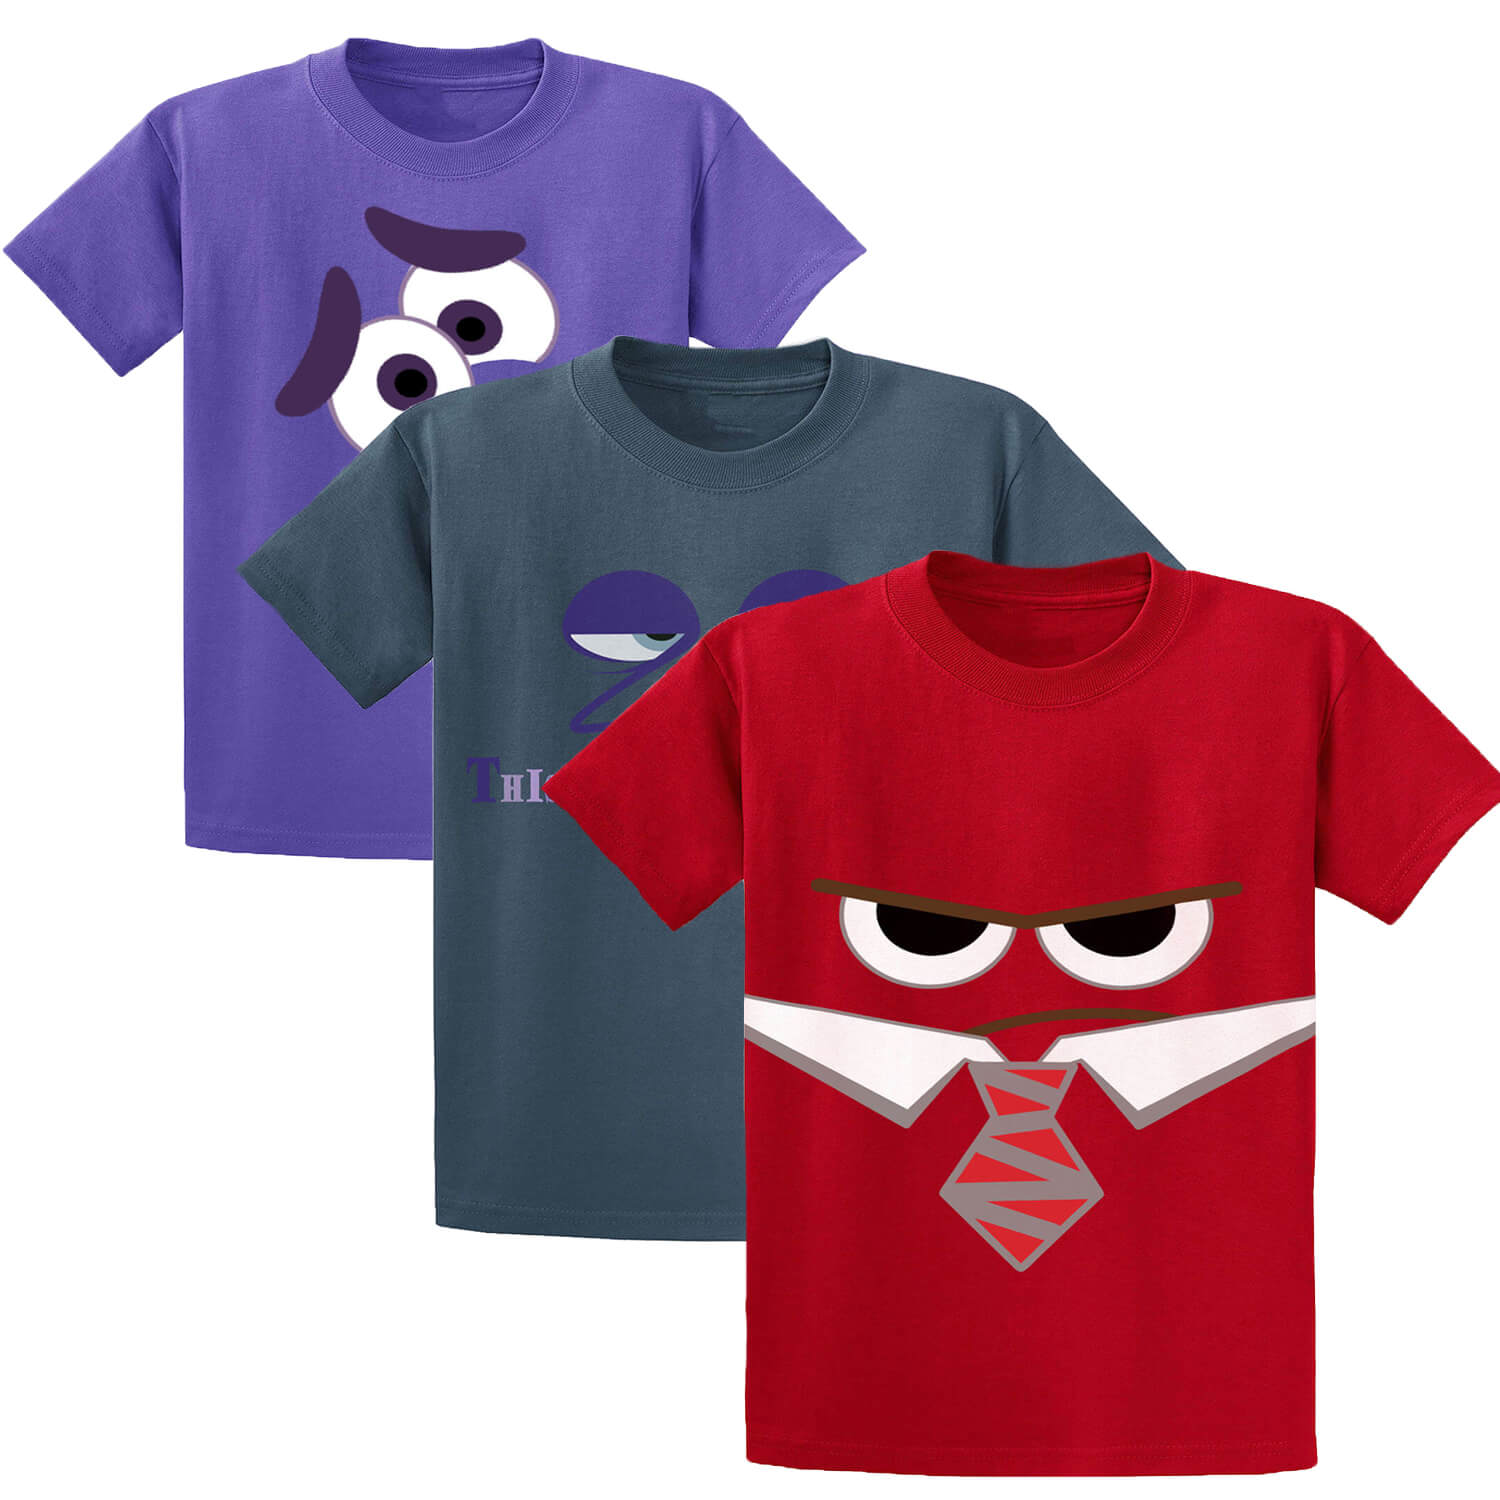 Kids Anger Shirt 100% Cotton 2024 Emotions Anger Ennui Fear Anxiety Cosplay T-shirts